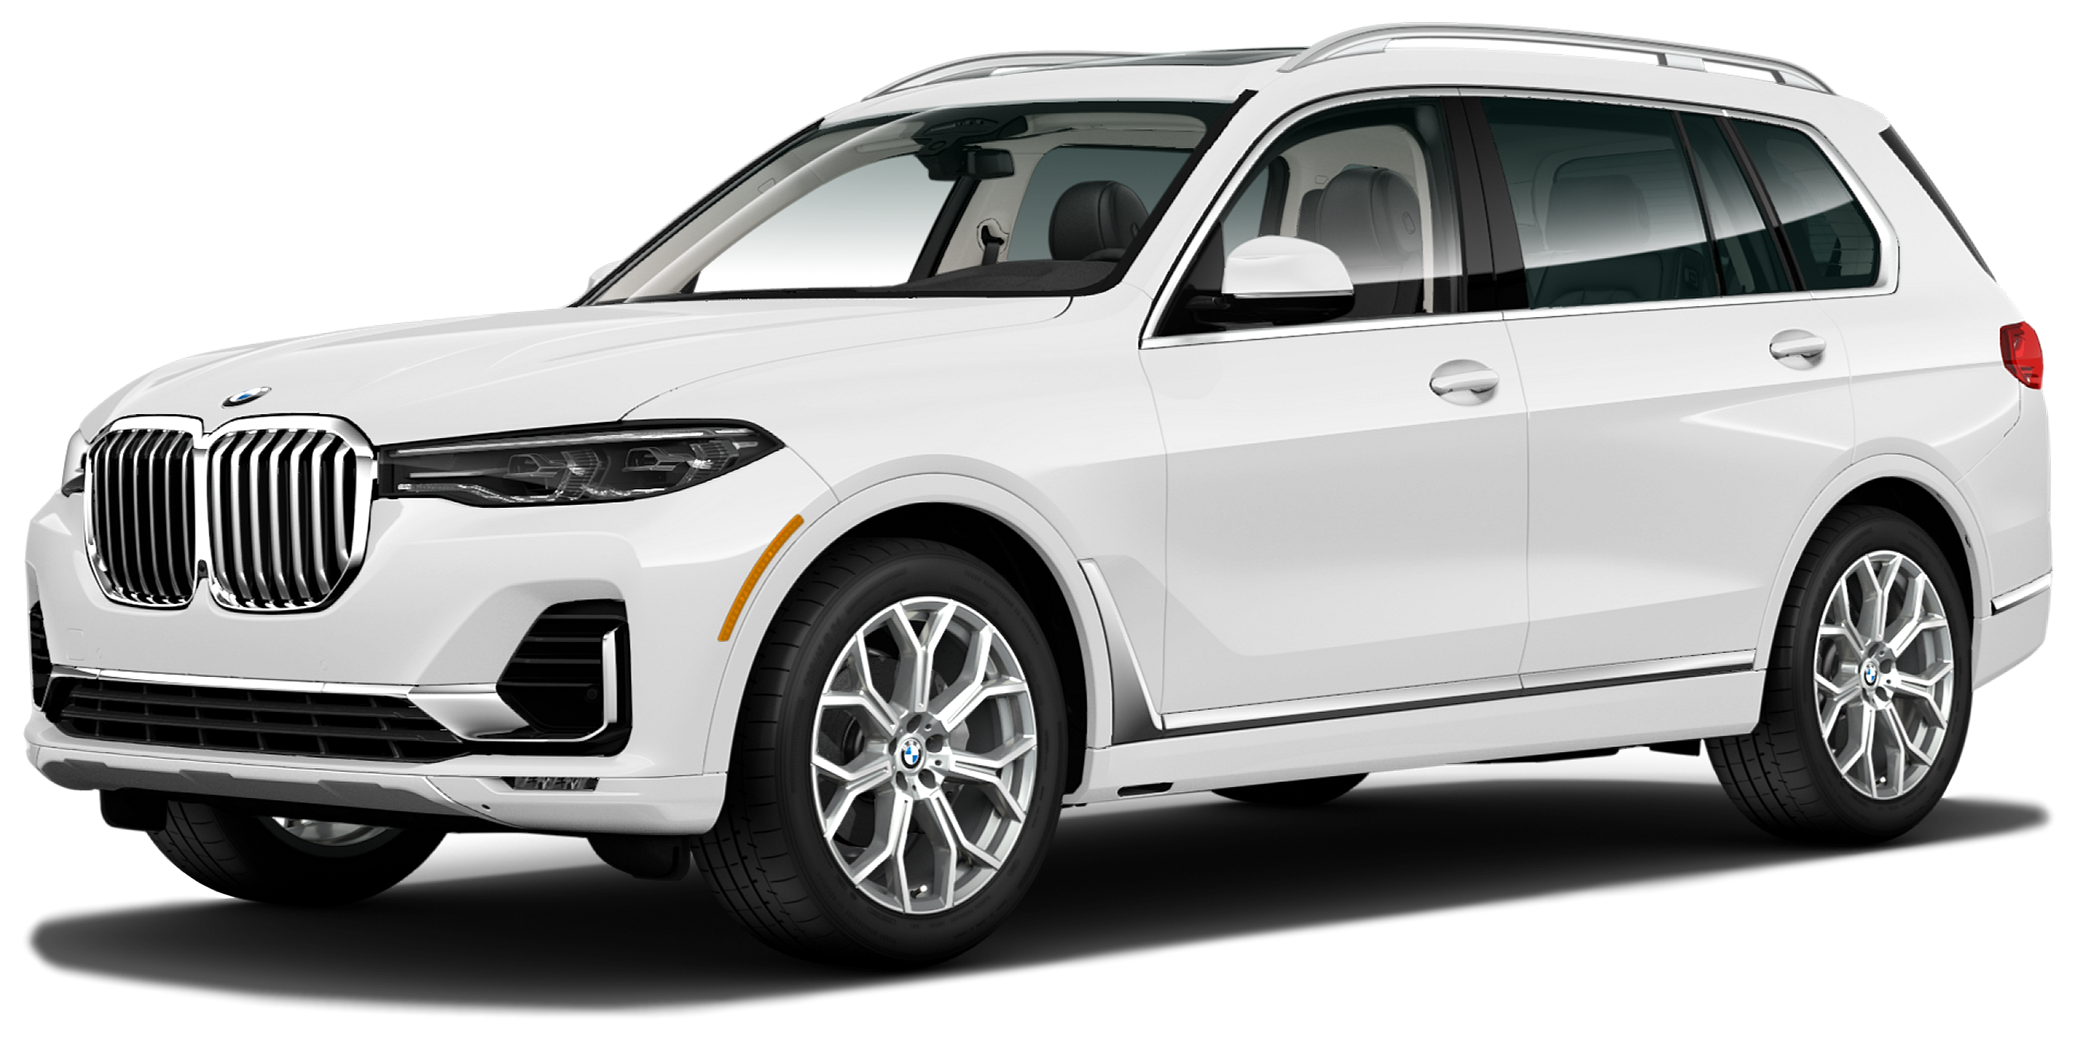 2021 BMW X7 Incentives, Specials & Offers in Irvine CA